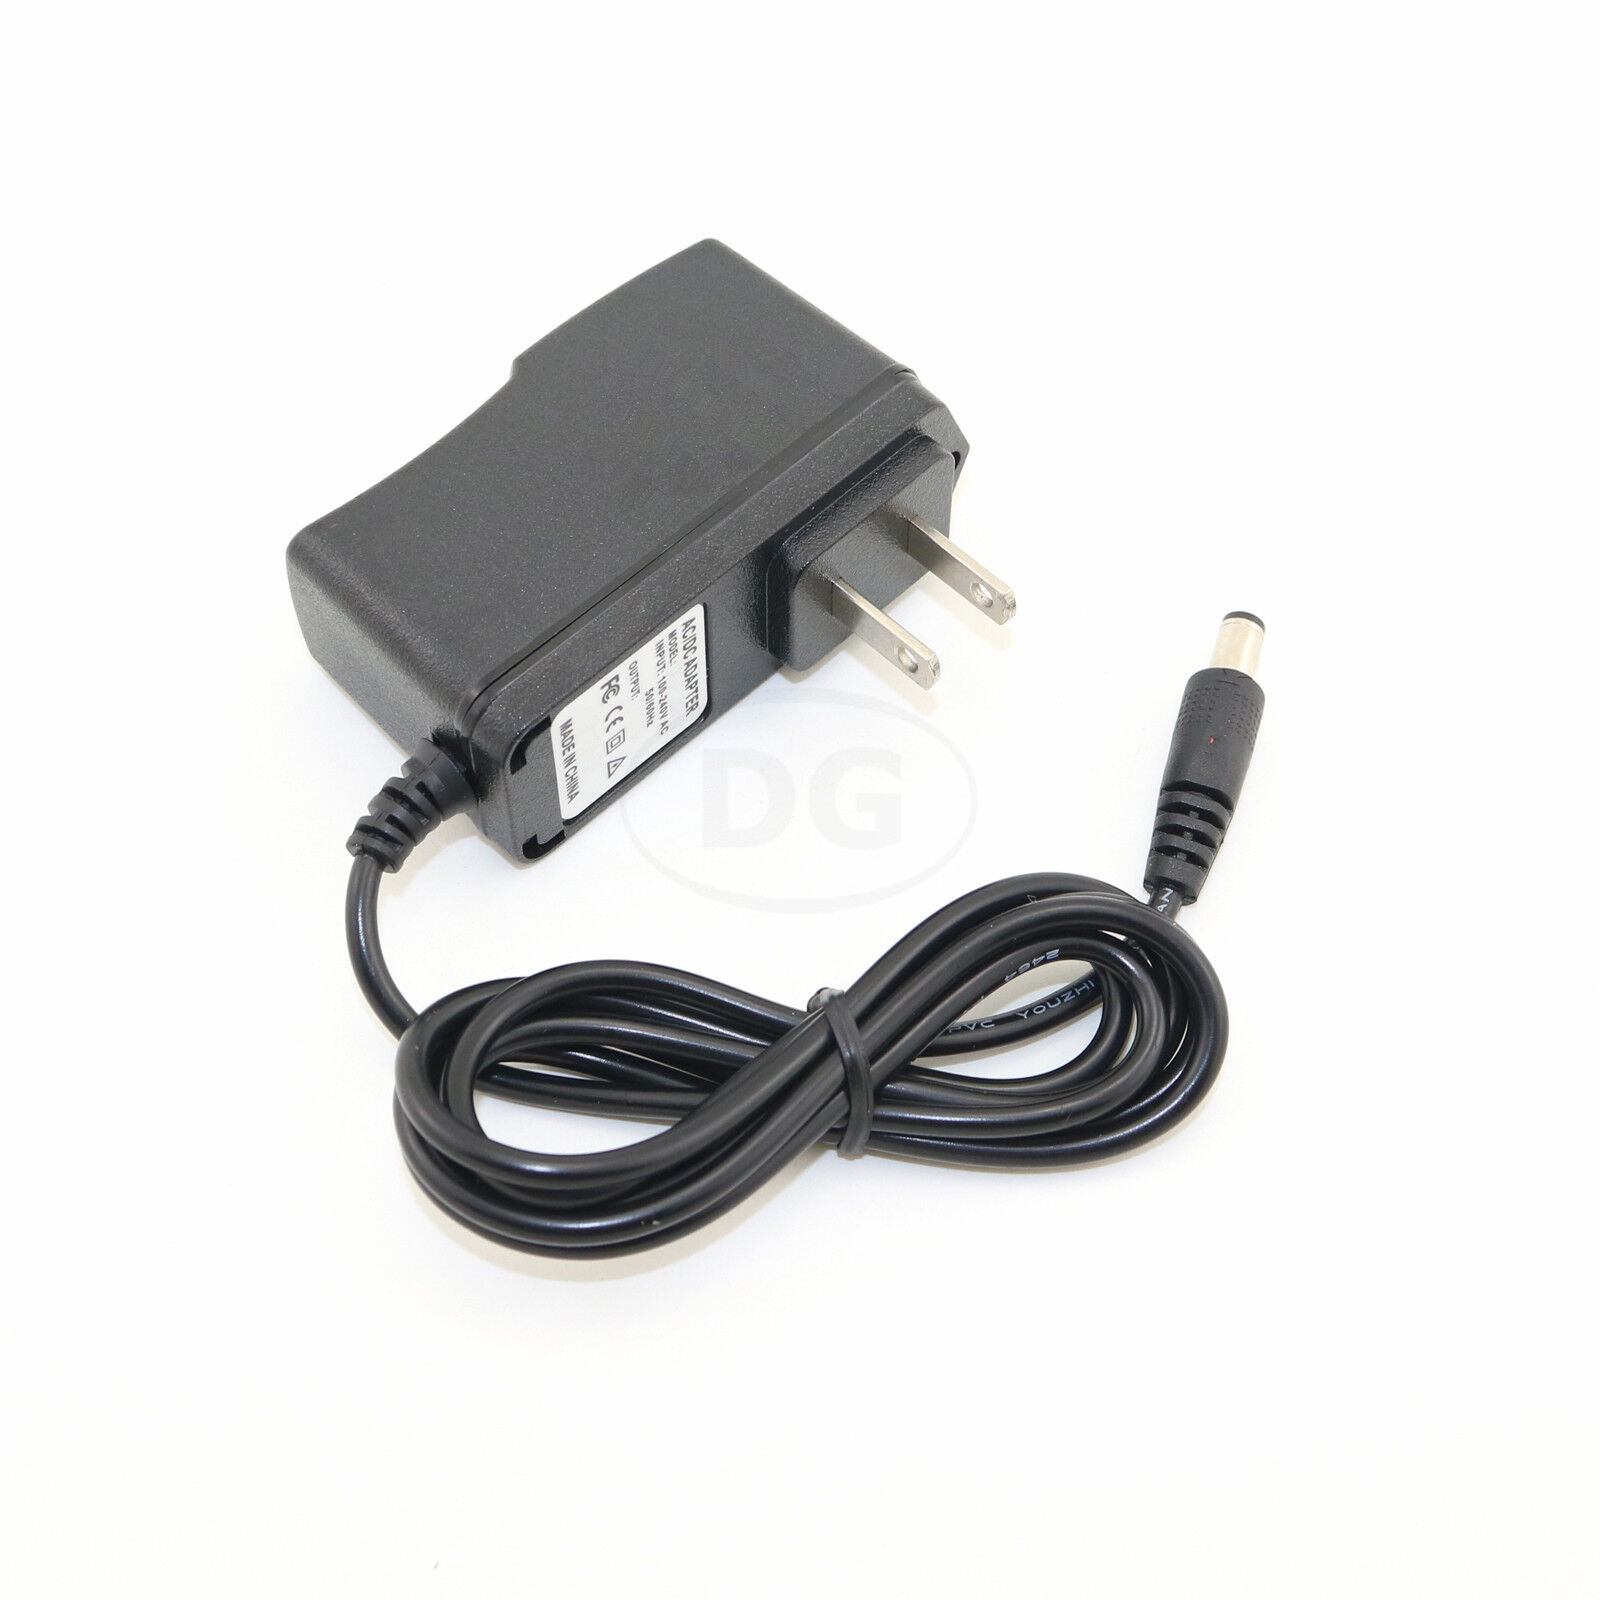 AC/DC Adapter Cord for Casio CTK-2400 CTK-4400 CTK-2090 Power Supply Cord